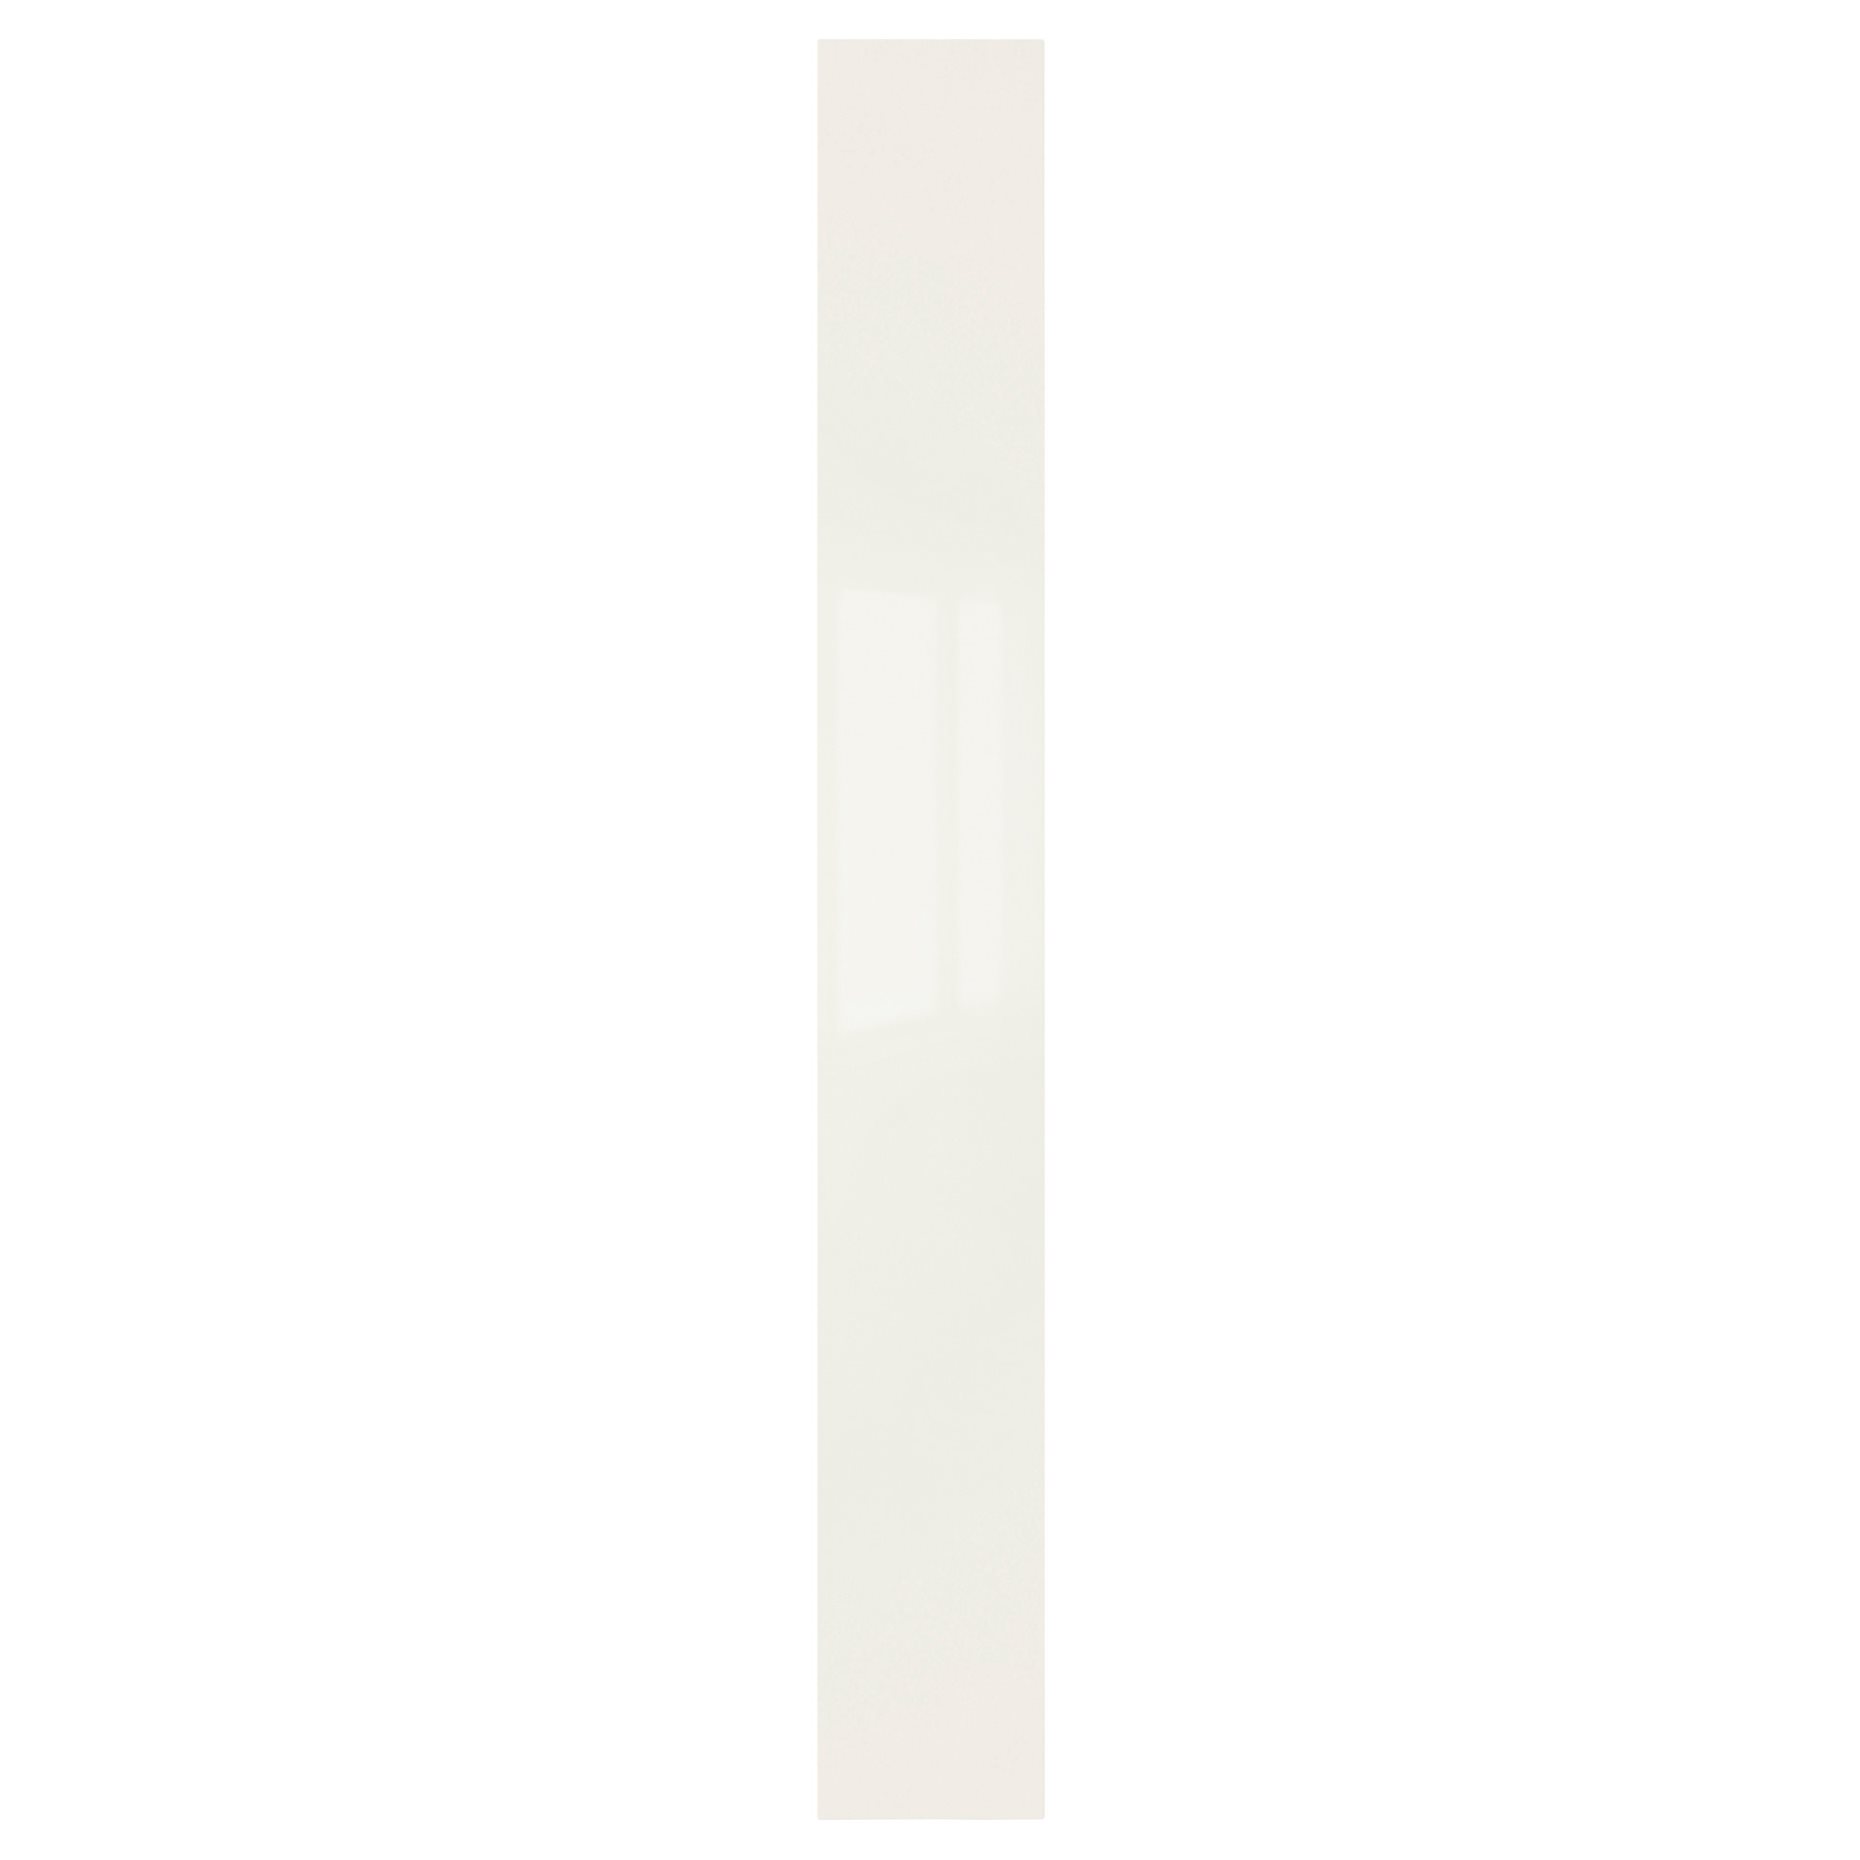 FARDAL, door with hinges/high-gloss, 25x195 cm, 891.881.74